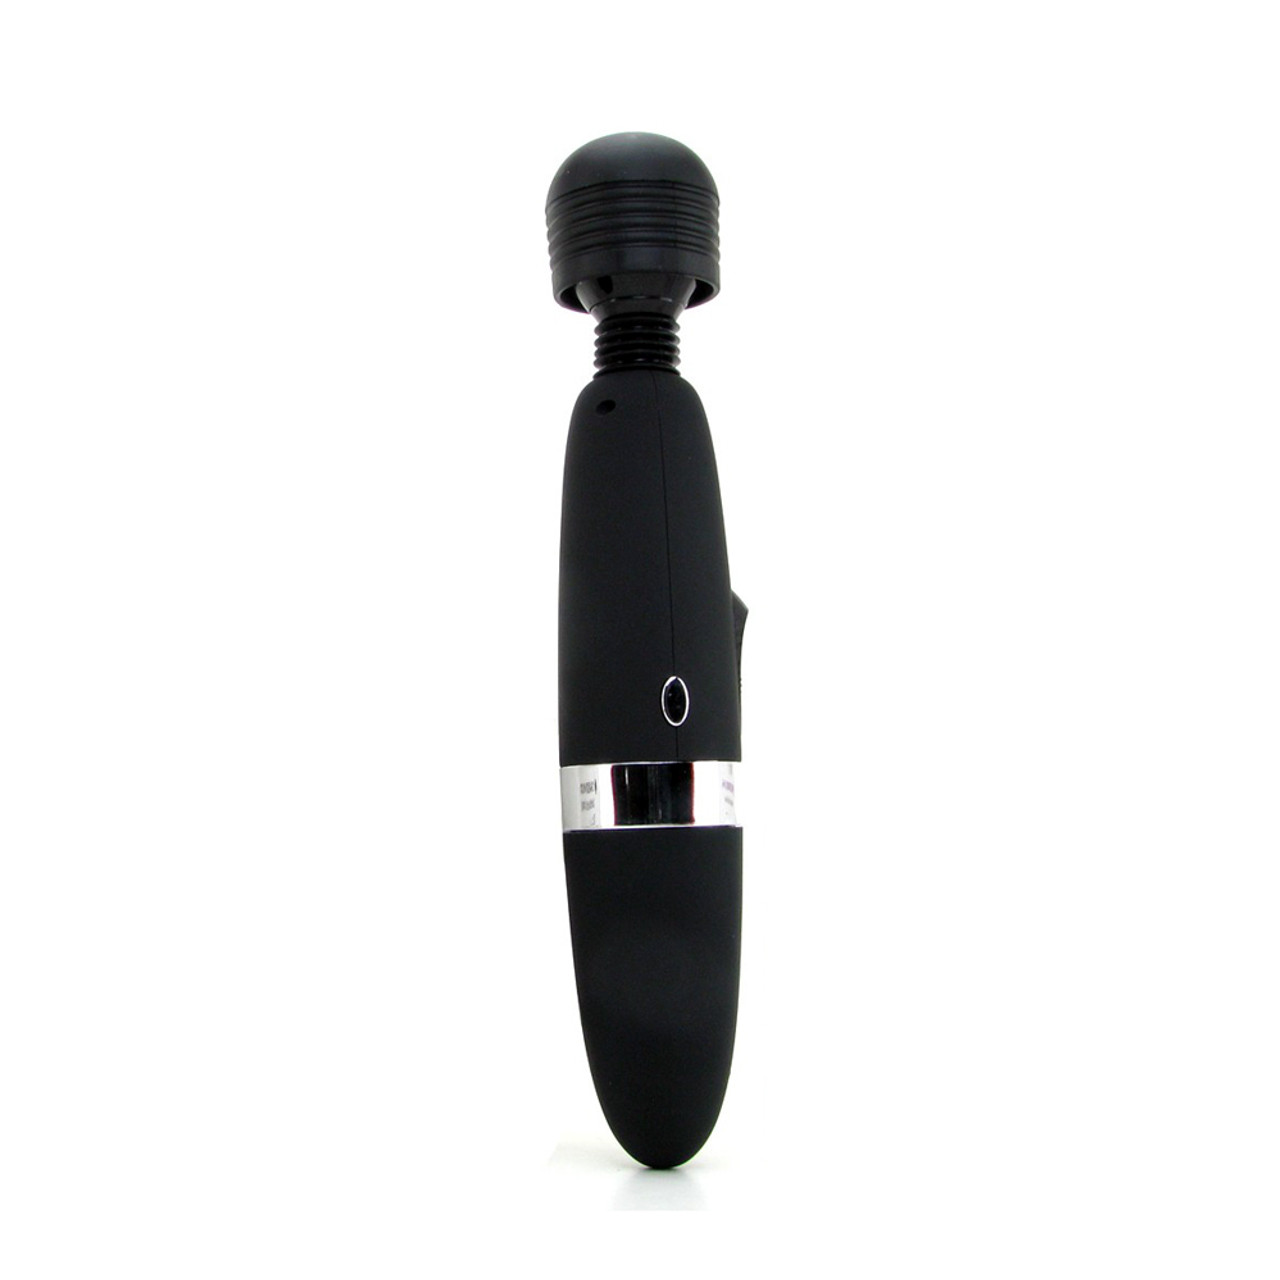 https://cdn11.bigcommerce.com/s-rph88/images/stencil/1280x1280/products/2646/172932/EXGBW109-bodywand-multispeed-rechargeable-silicone-wand-massager-with-o-button-black_7a__00700.1553521993.jpg?c=2